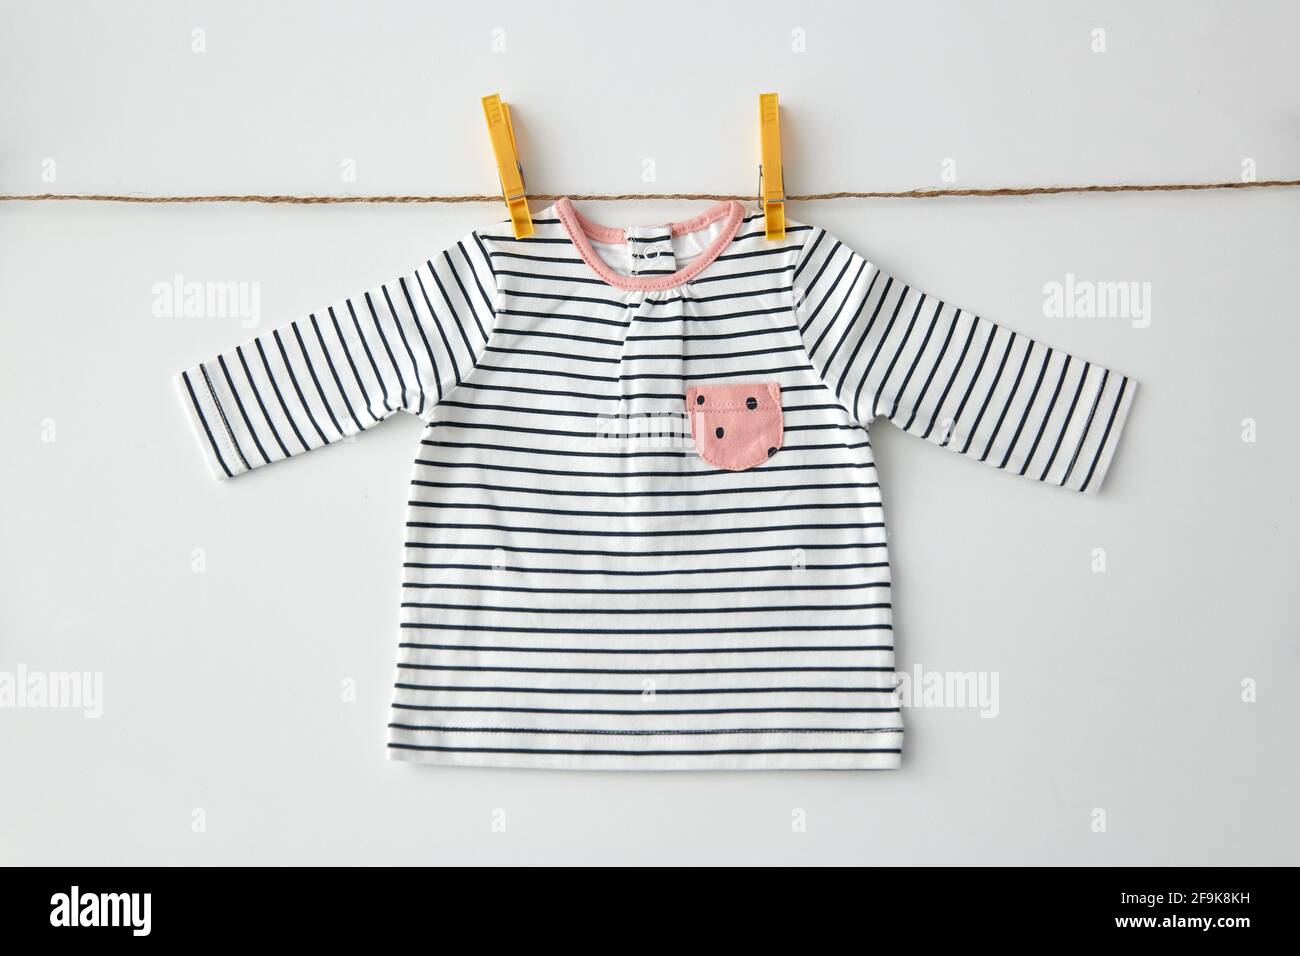 shirt for baby girl hanging on rope with pins Stock Photo